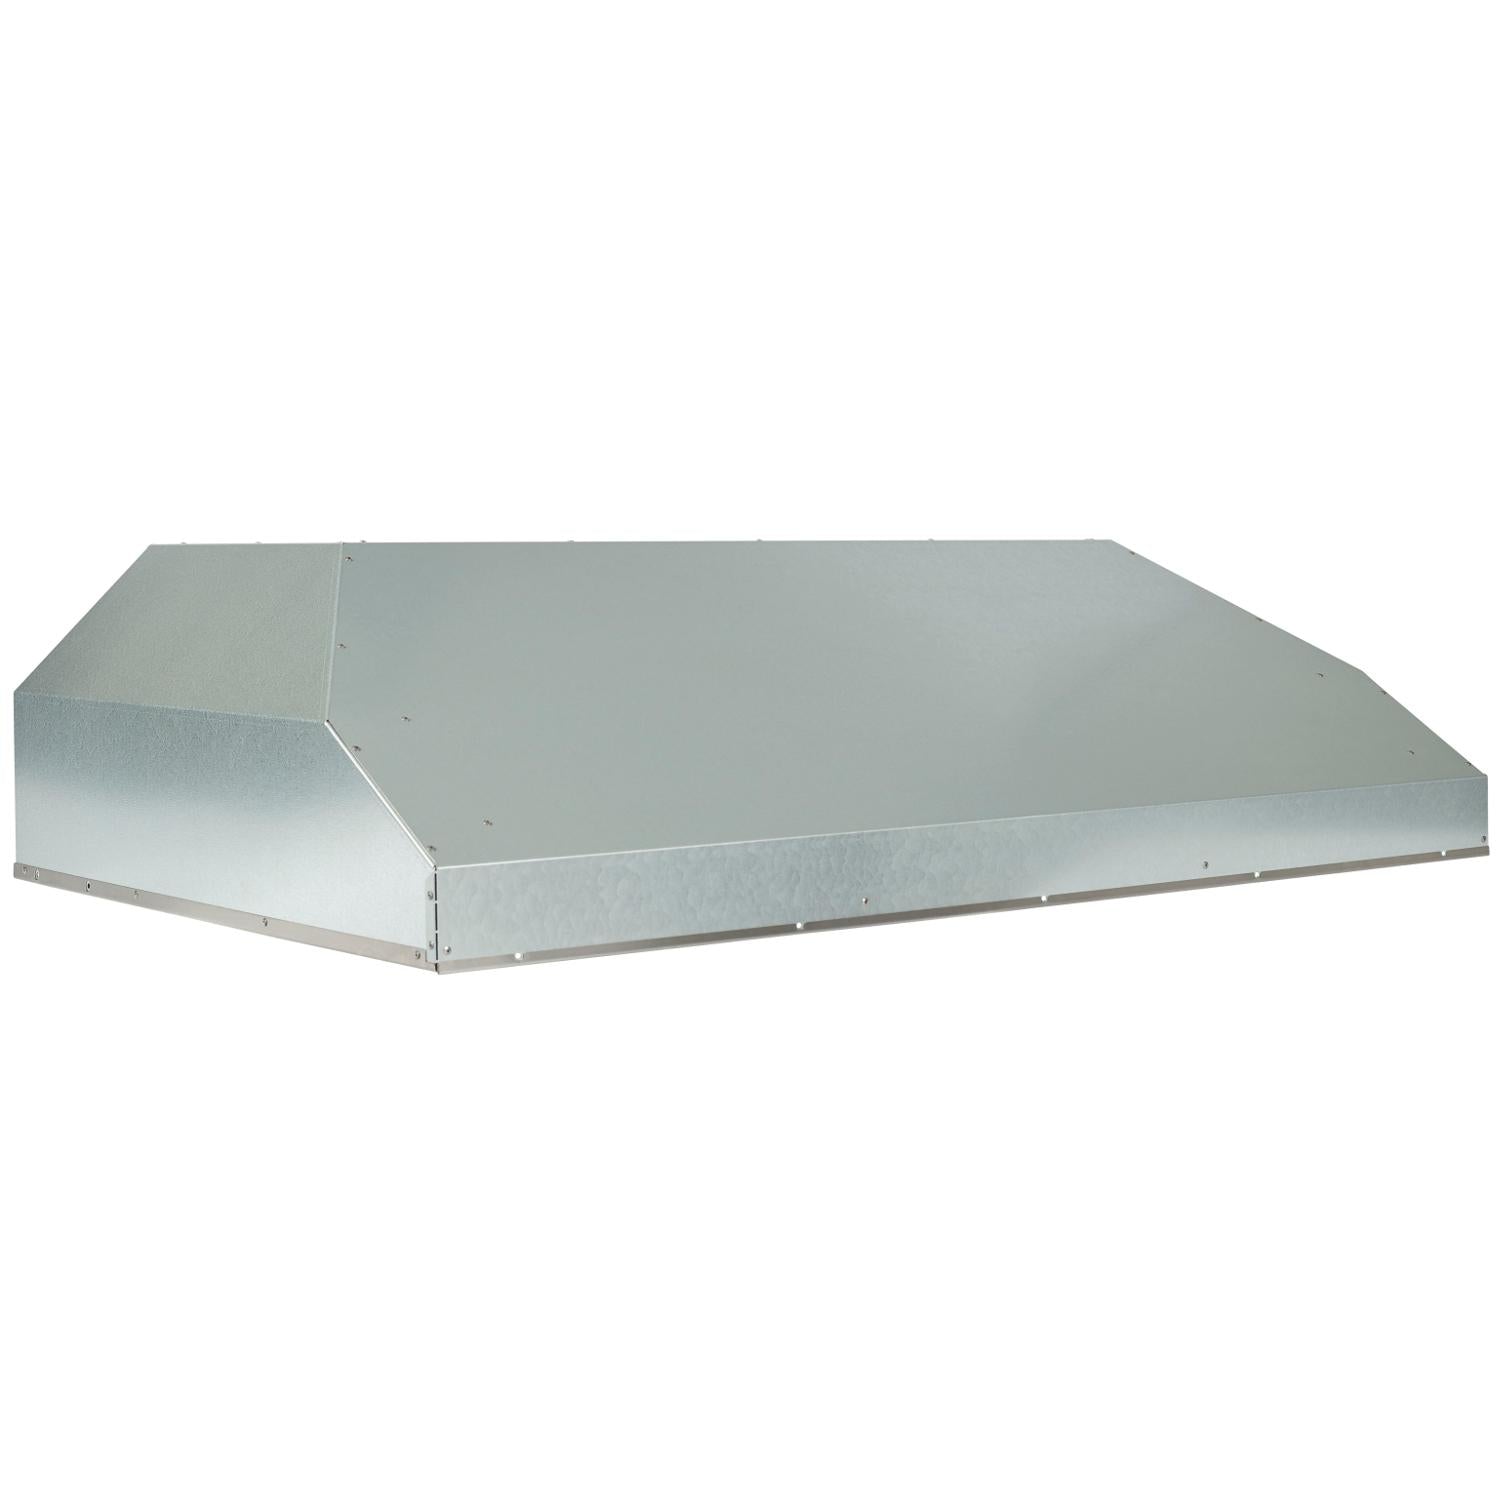 Coyote 48-Inch Stainless Steel Outdoor Hood Insert